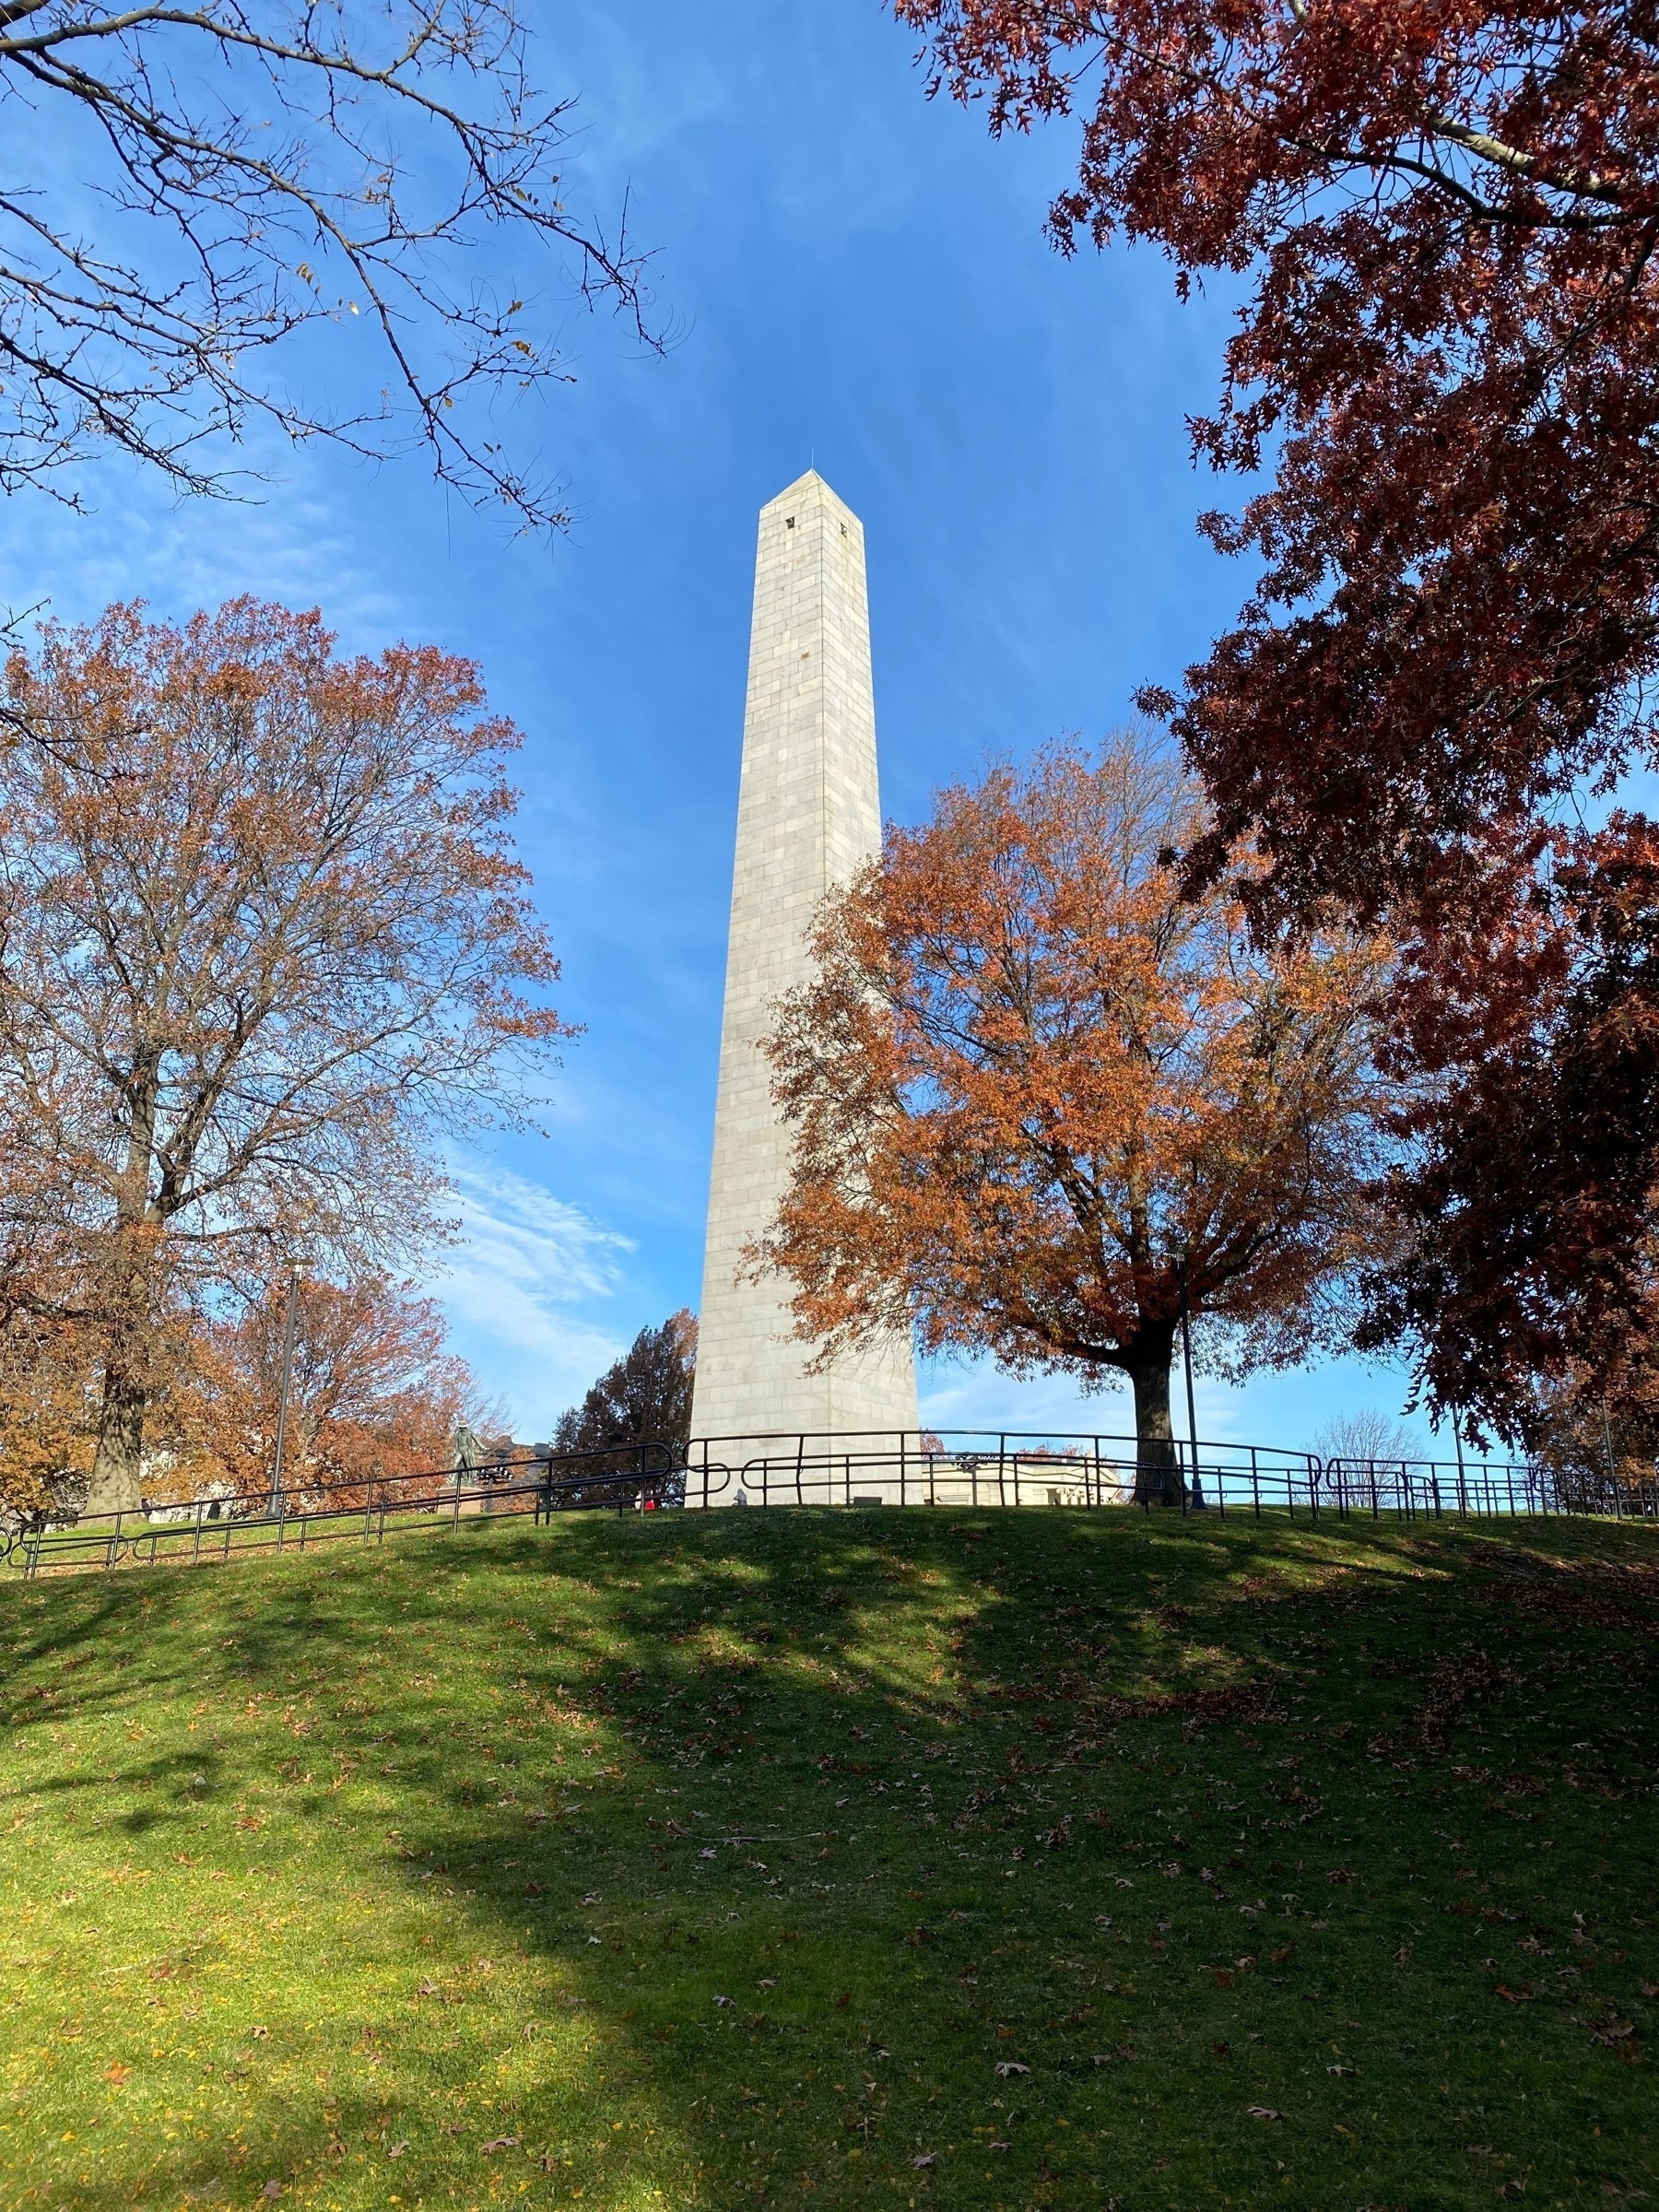 View of Bunker Hill Monument in the afternoon against a blue sky.